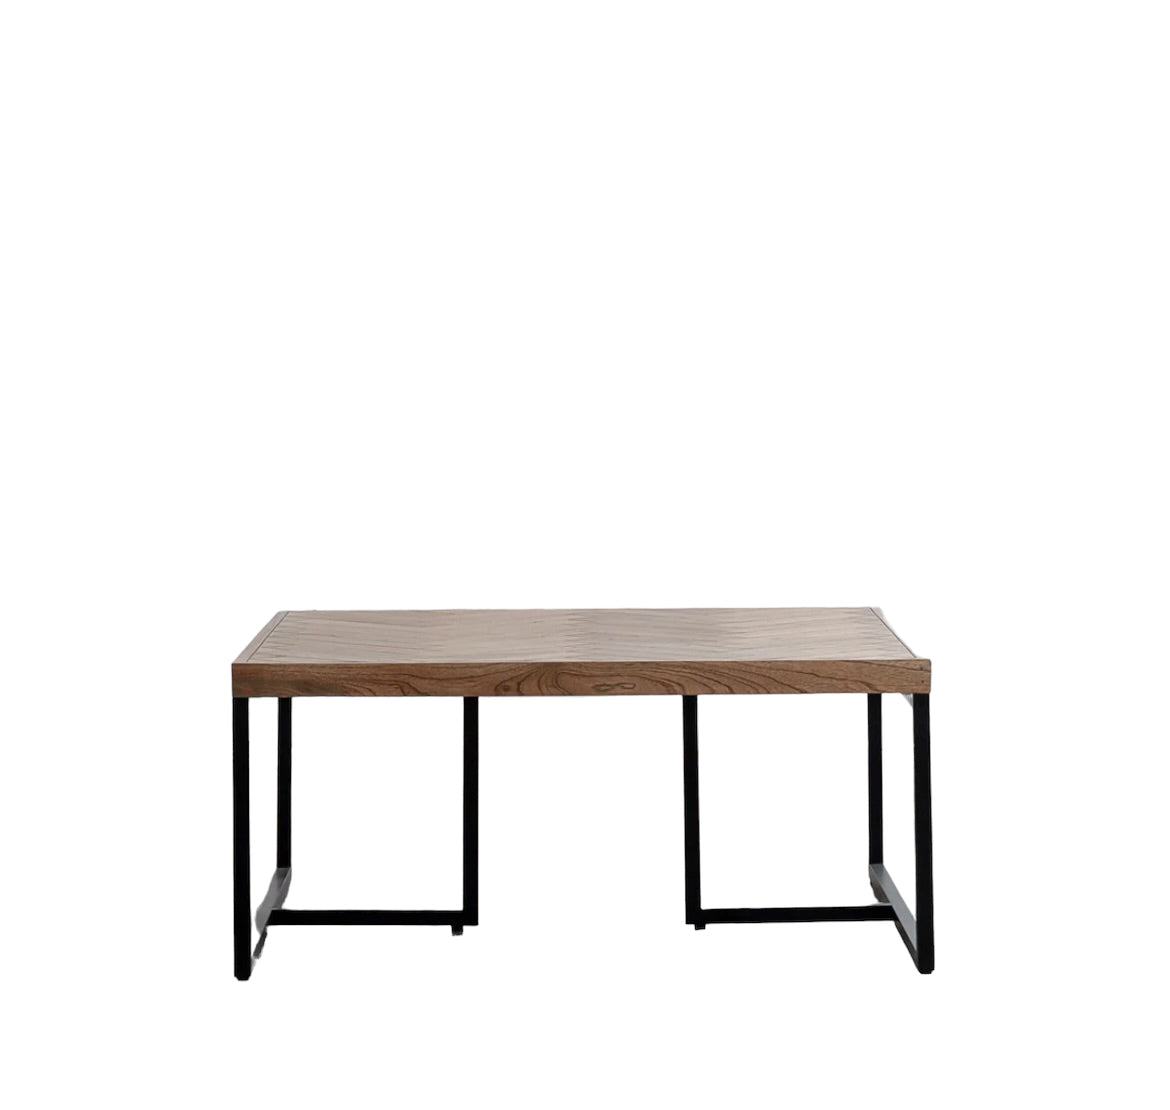 HAND MADE AXEL SCANDINAVIAN INSPIRED WOODEN COFFEE TABLE